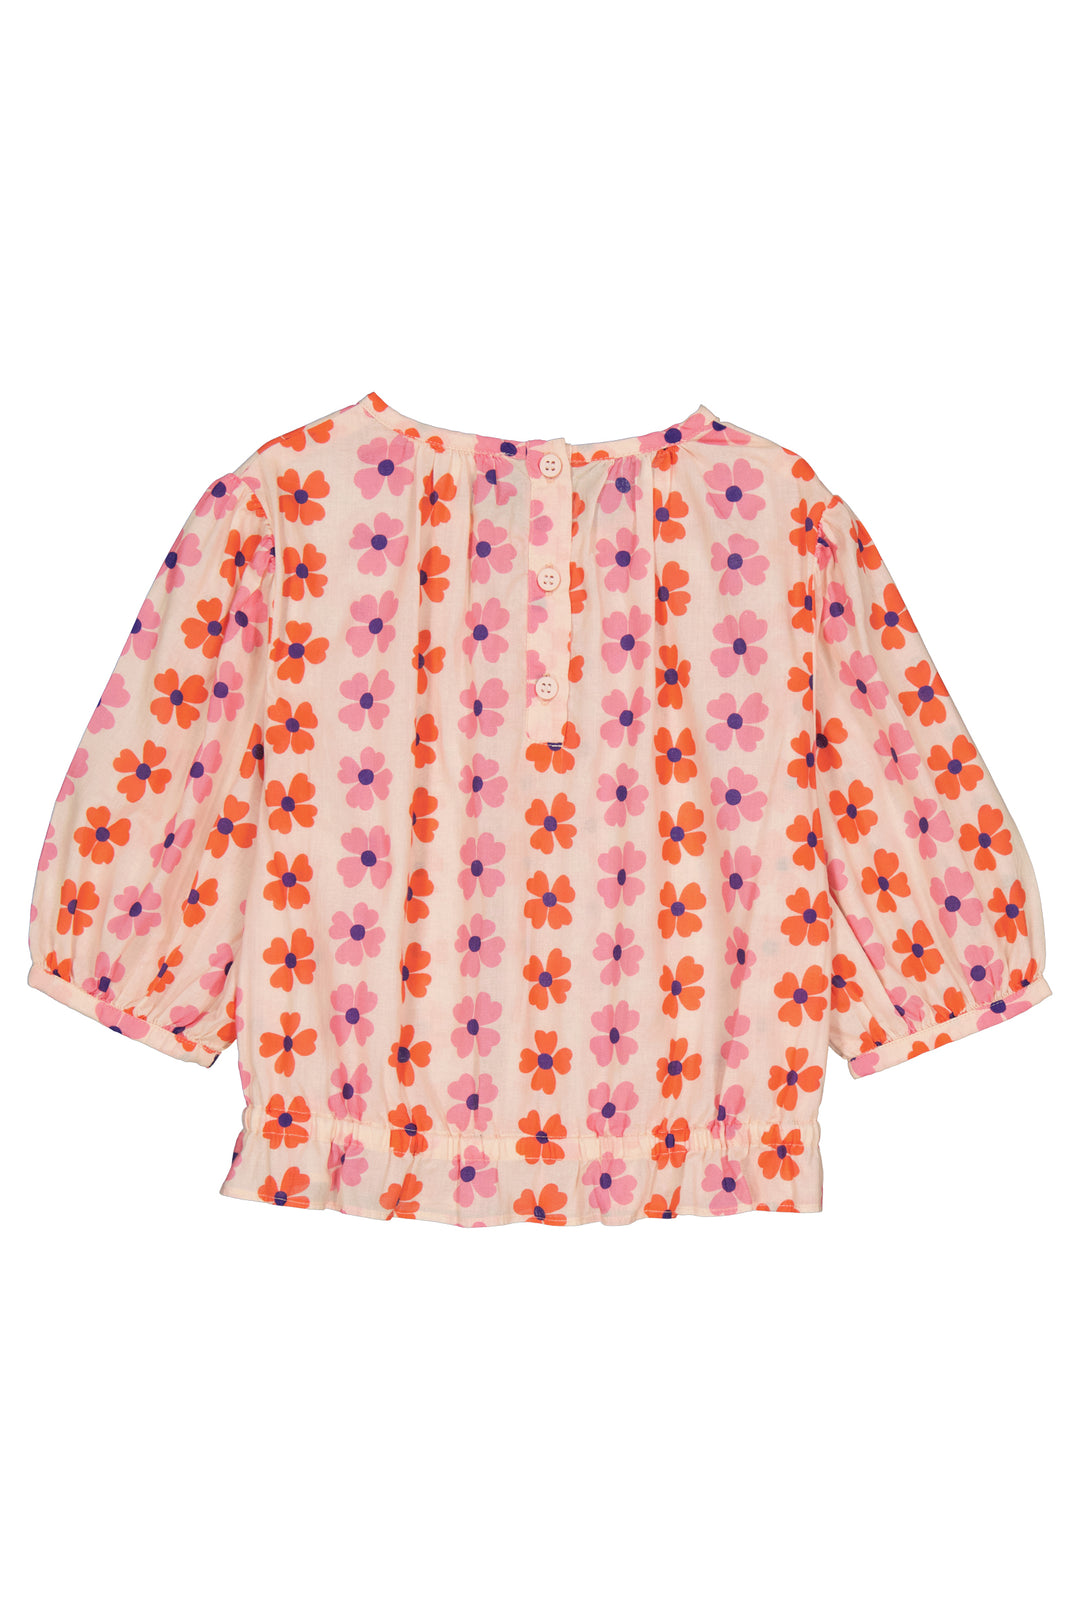 Blouse Girl Canelle Vahinee - قمة